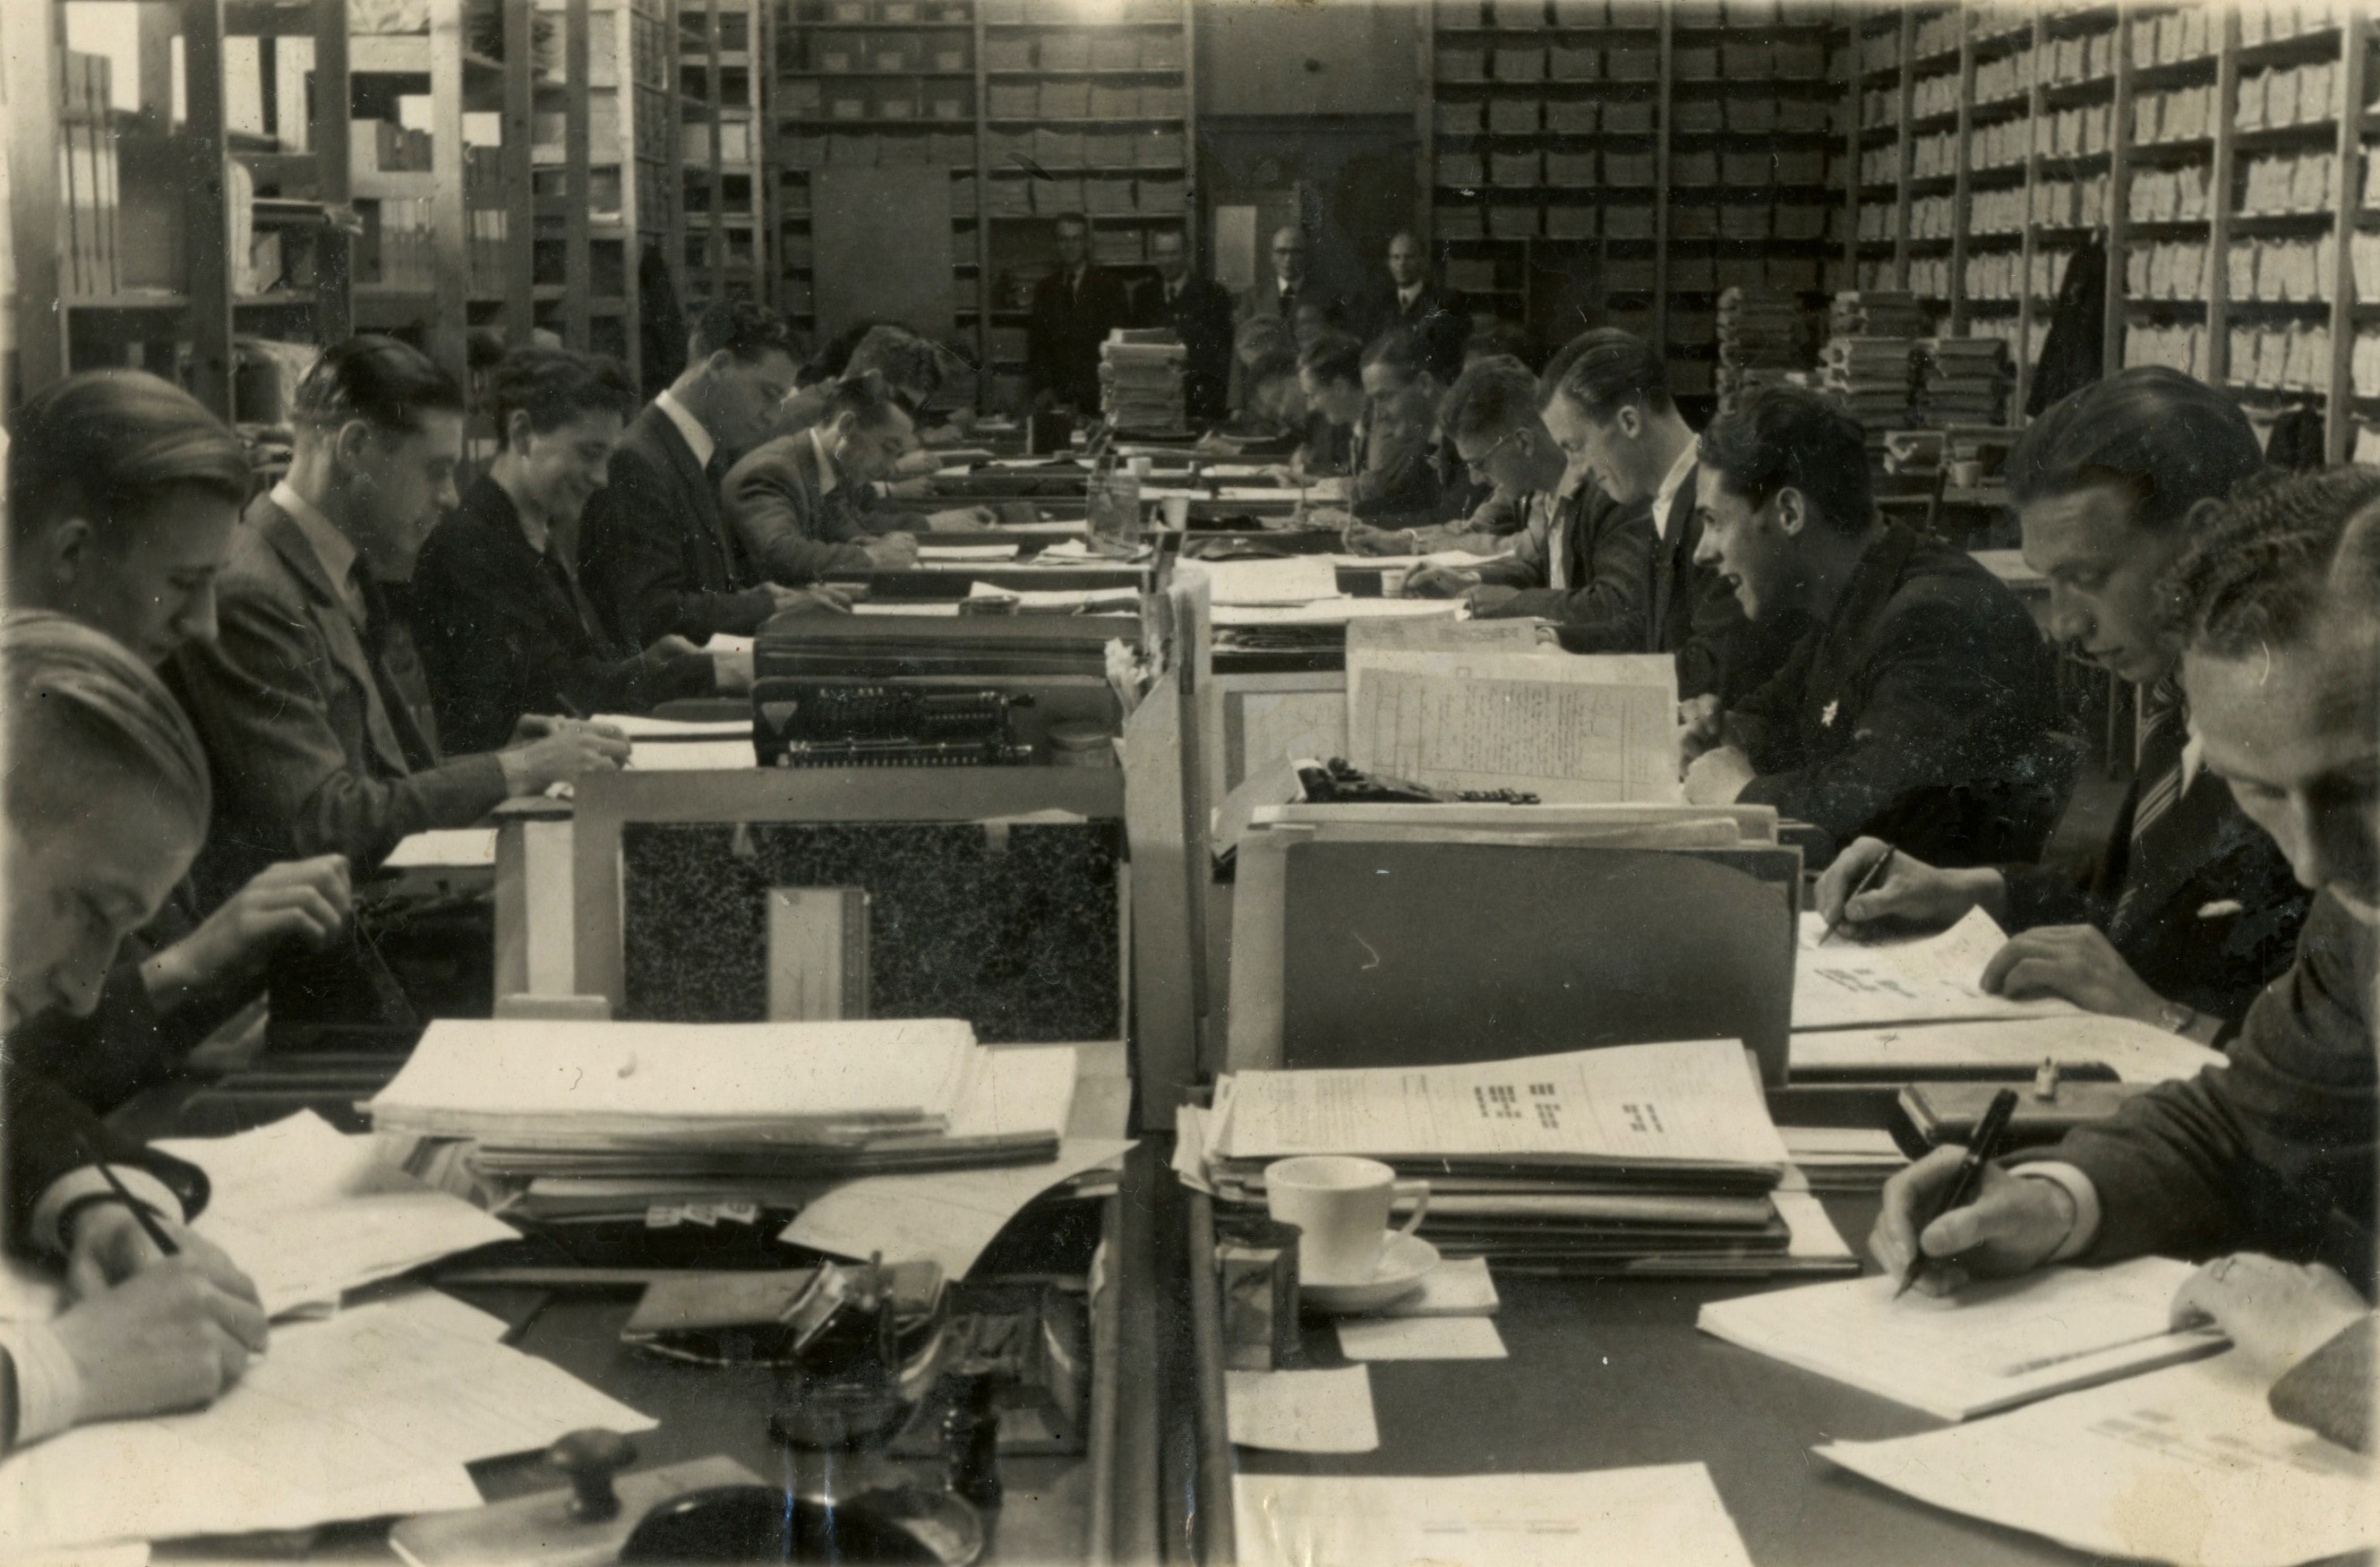 Processing the data from the punch cards in a CBS office